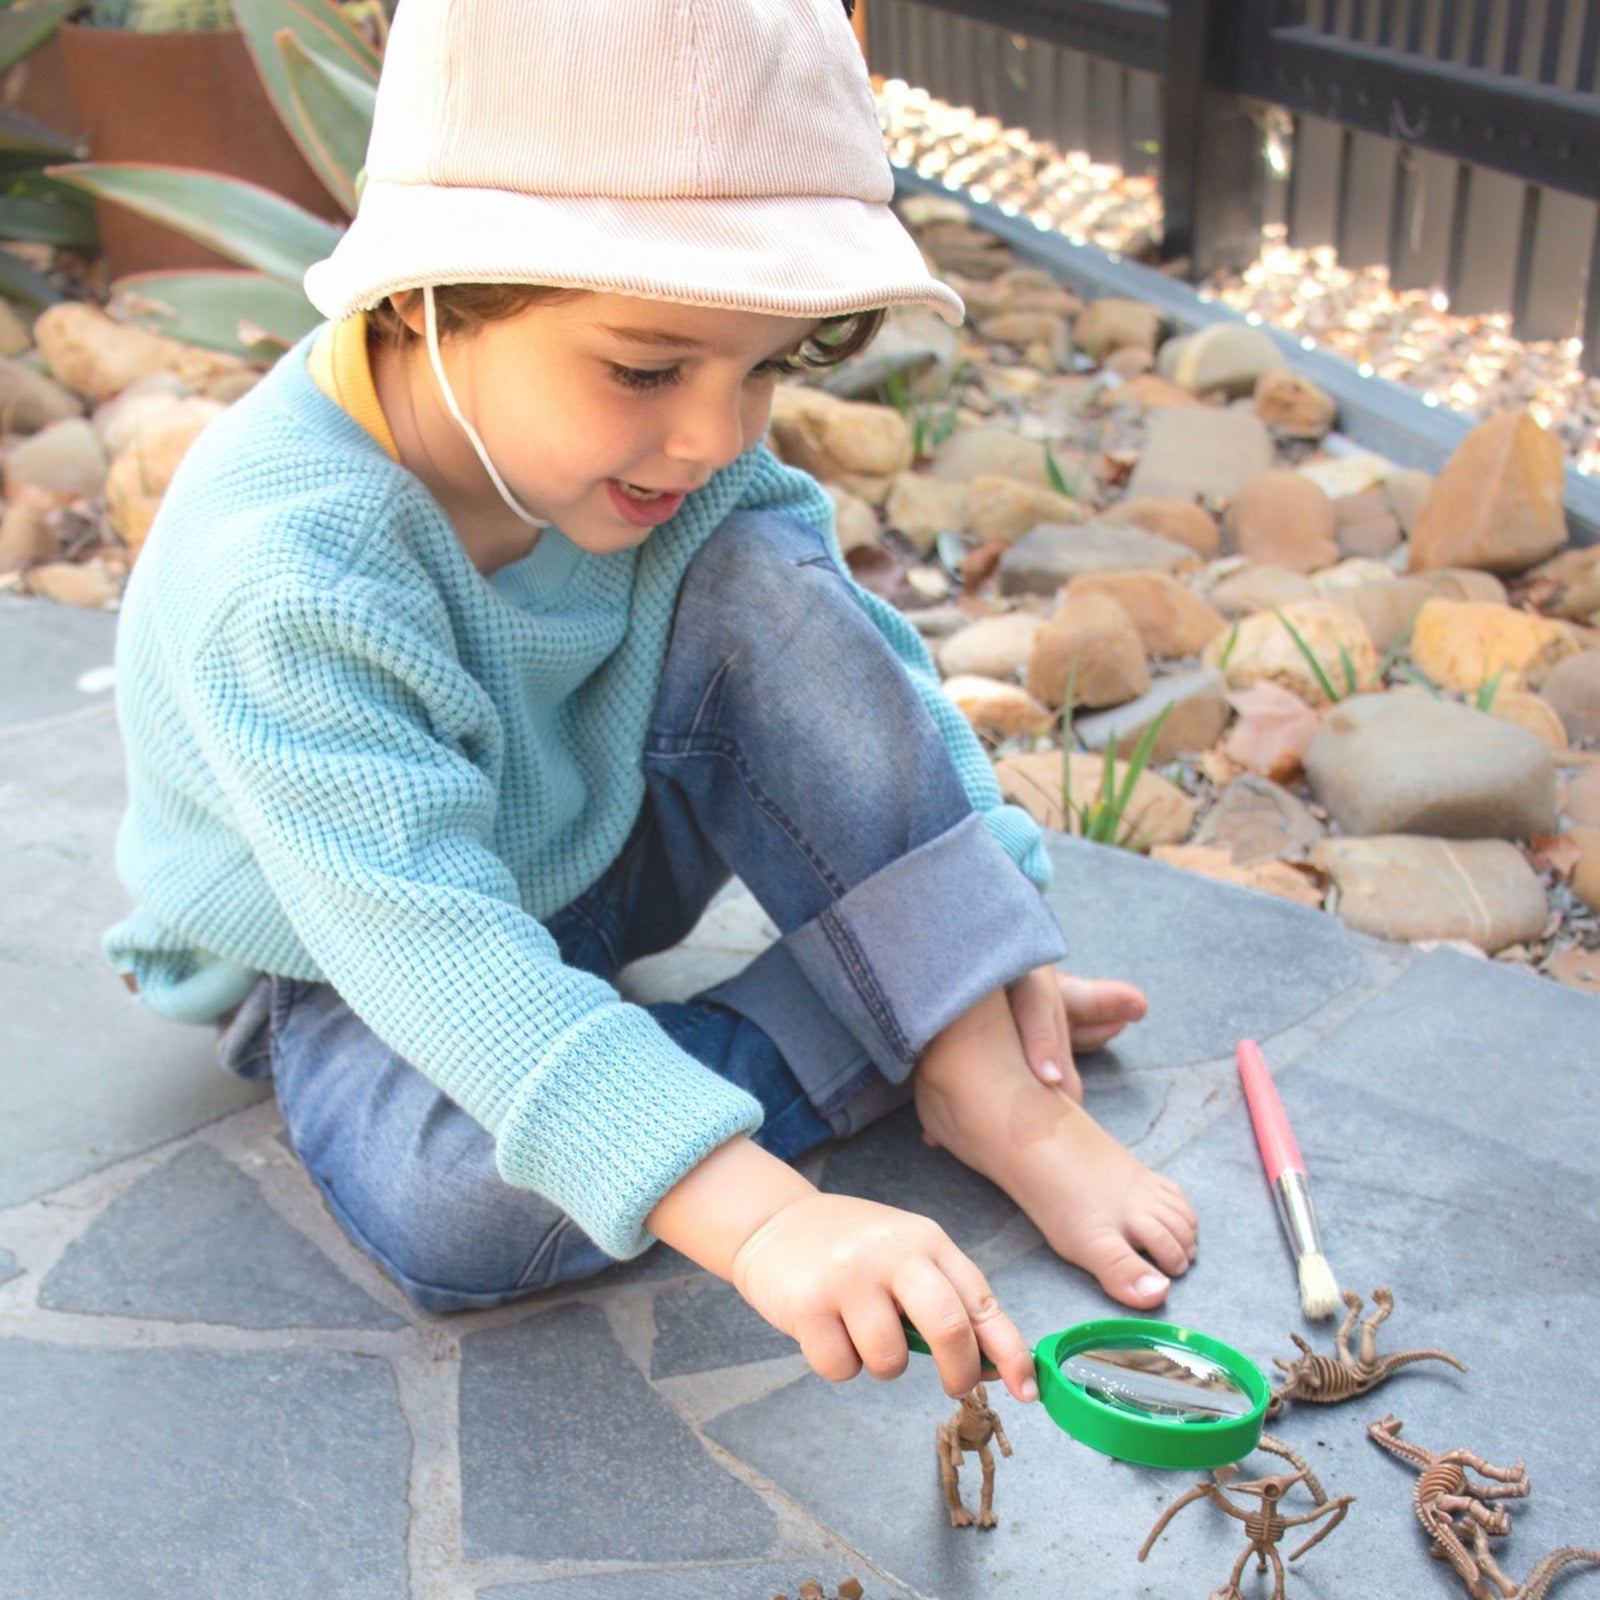 Dinosaur Explorer Kit with Augmented Reality for Kids